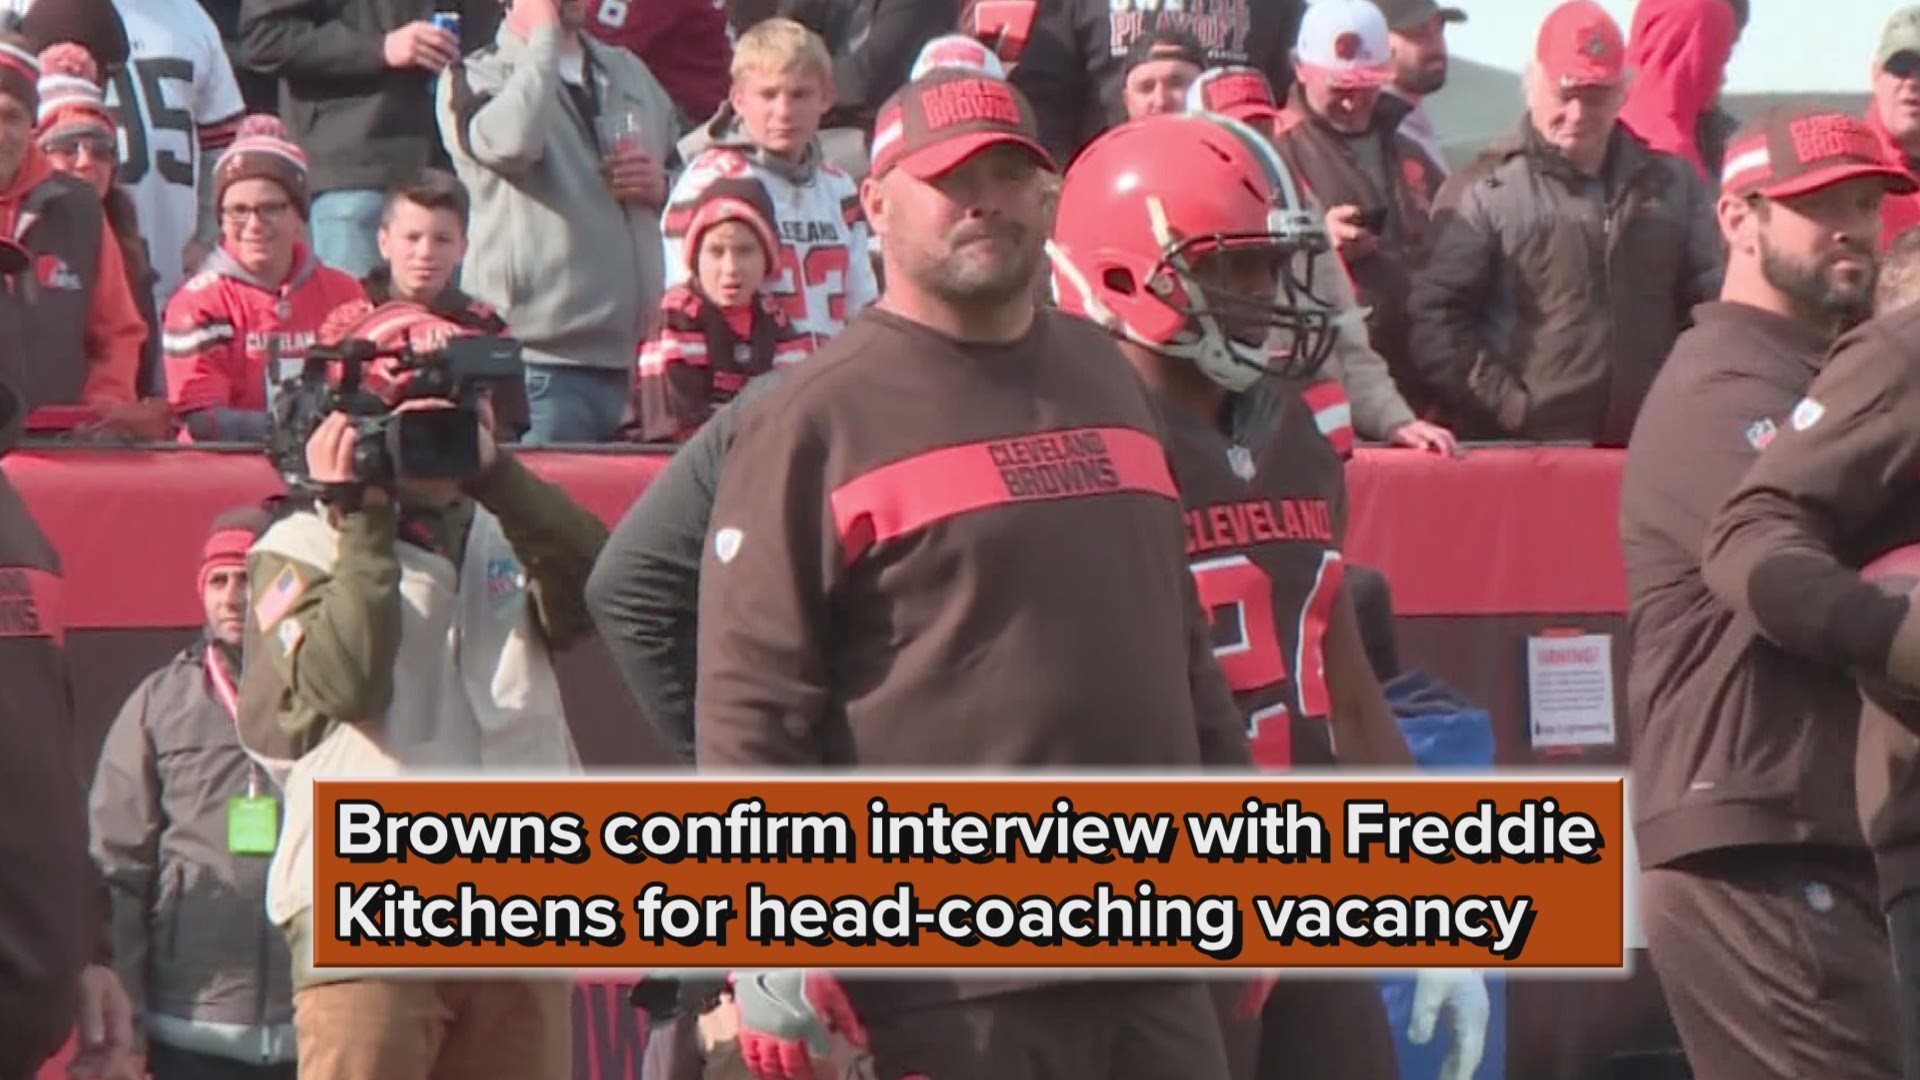 The Cleveland Browns have confirmed they have completed an interview with interim play-caller Freddie Kitchens for their head-coaching vacancy.